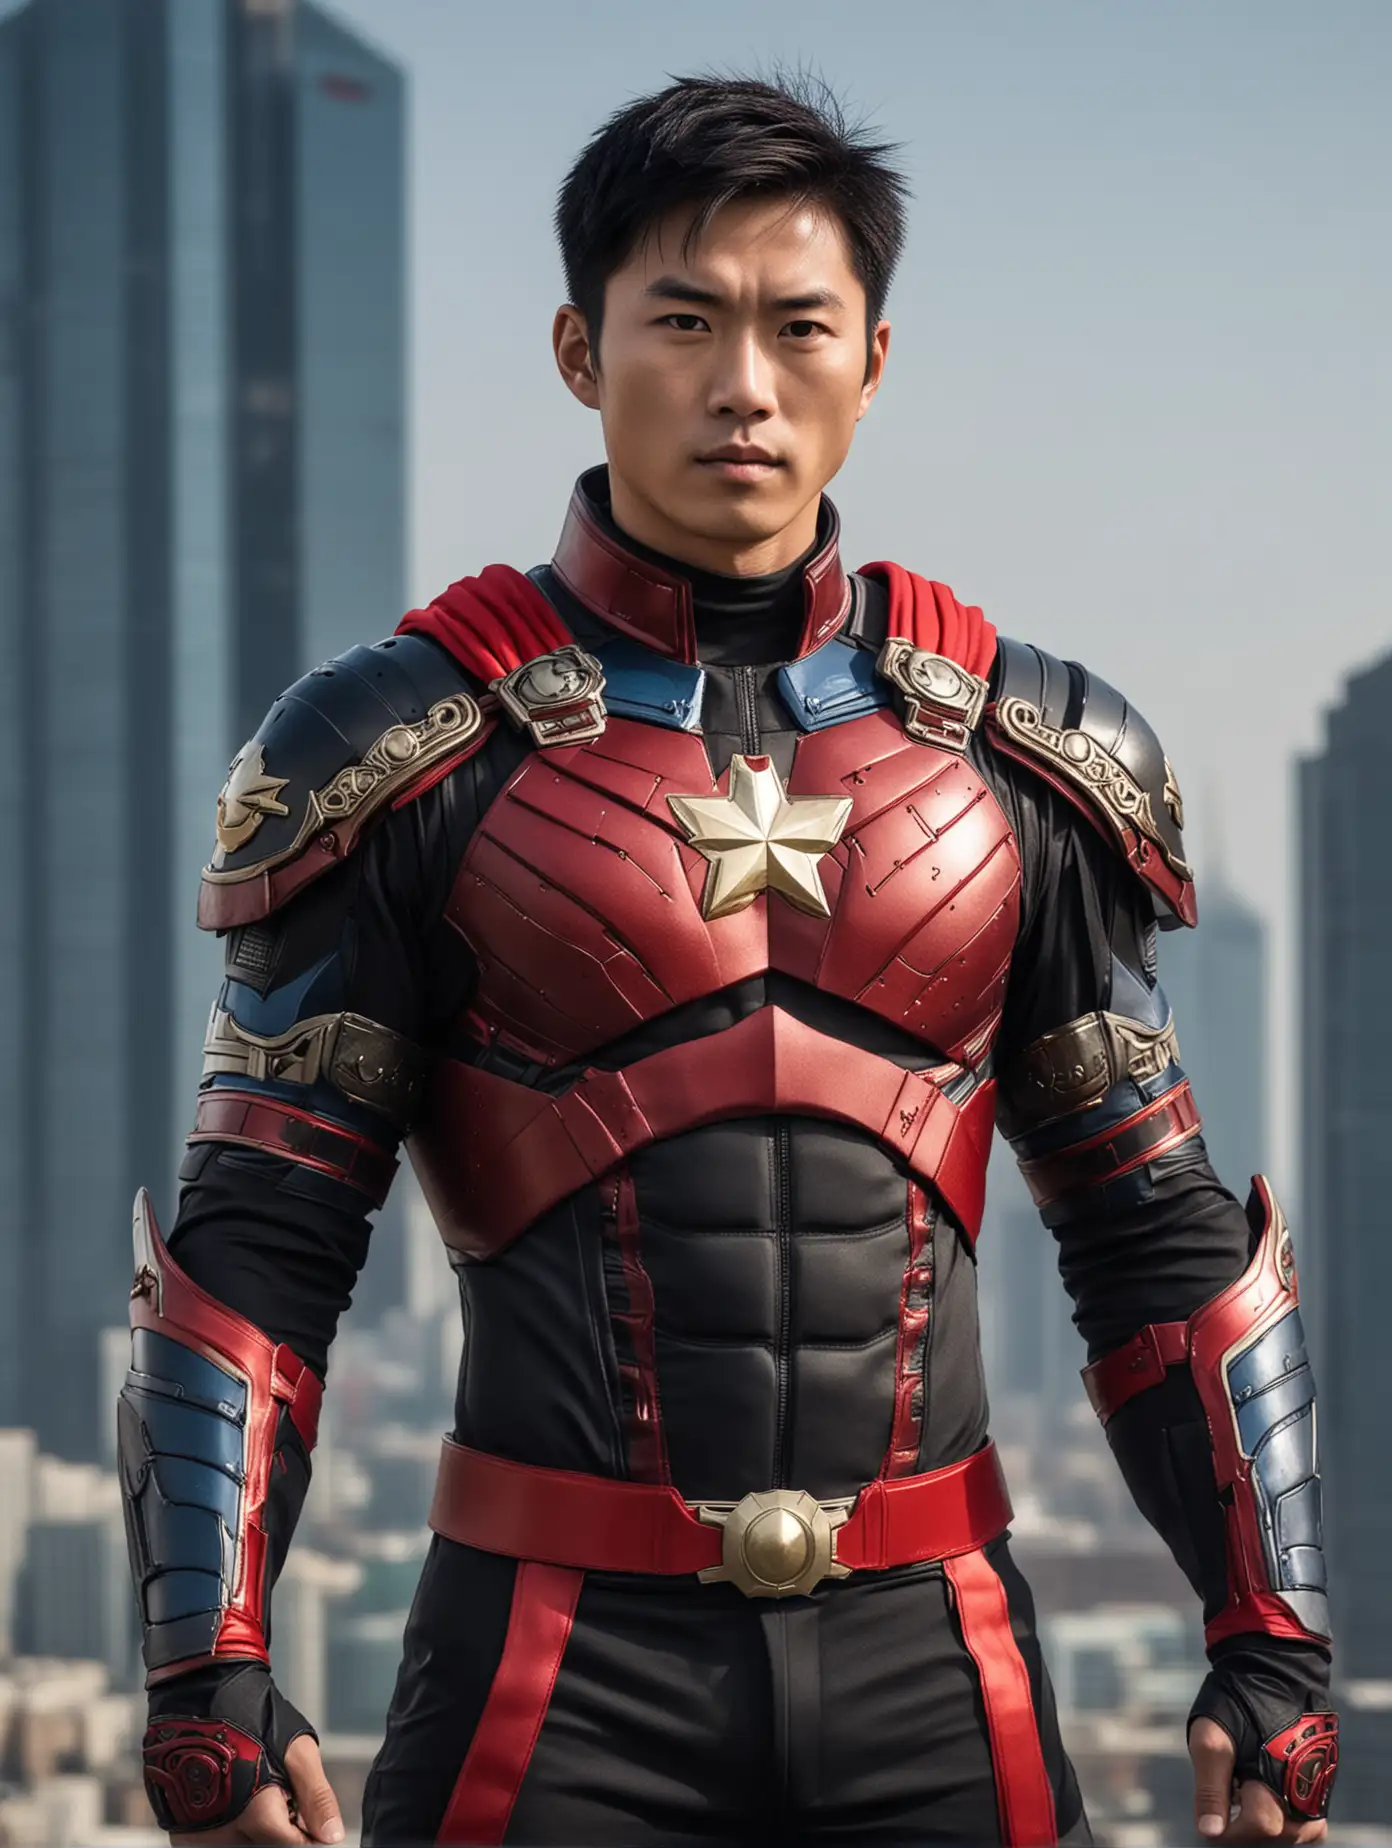 Confident Chinese Male Superhero in Black and Red Armor Against Eclipse Skyline